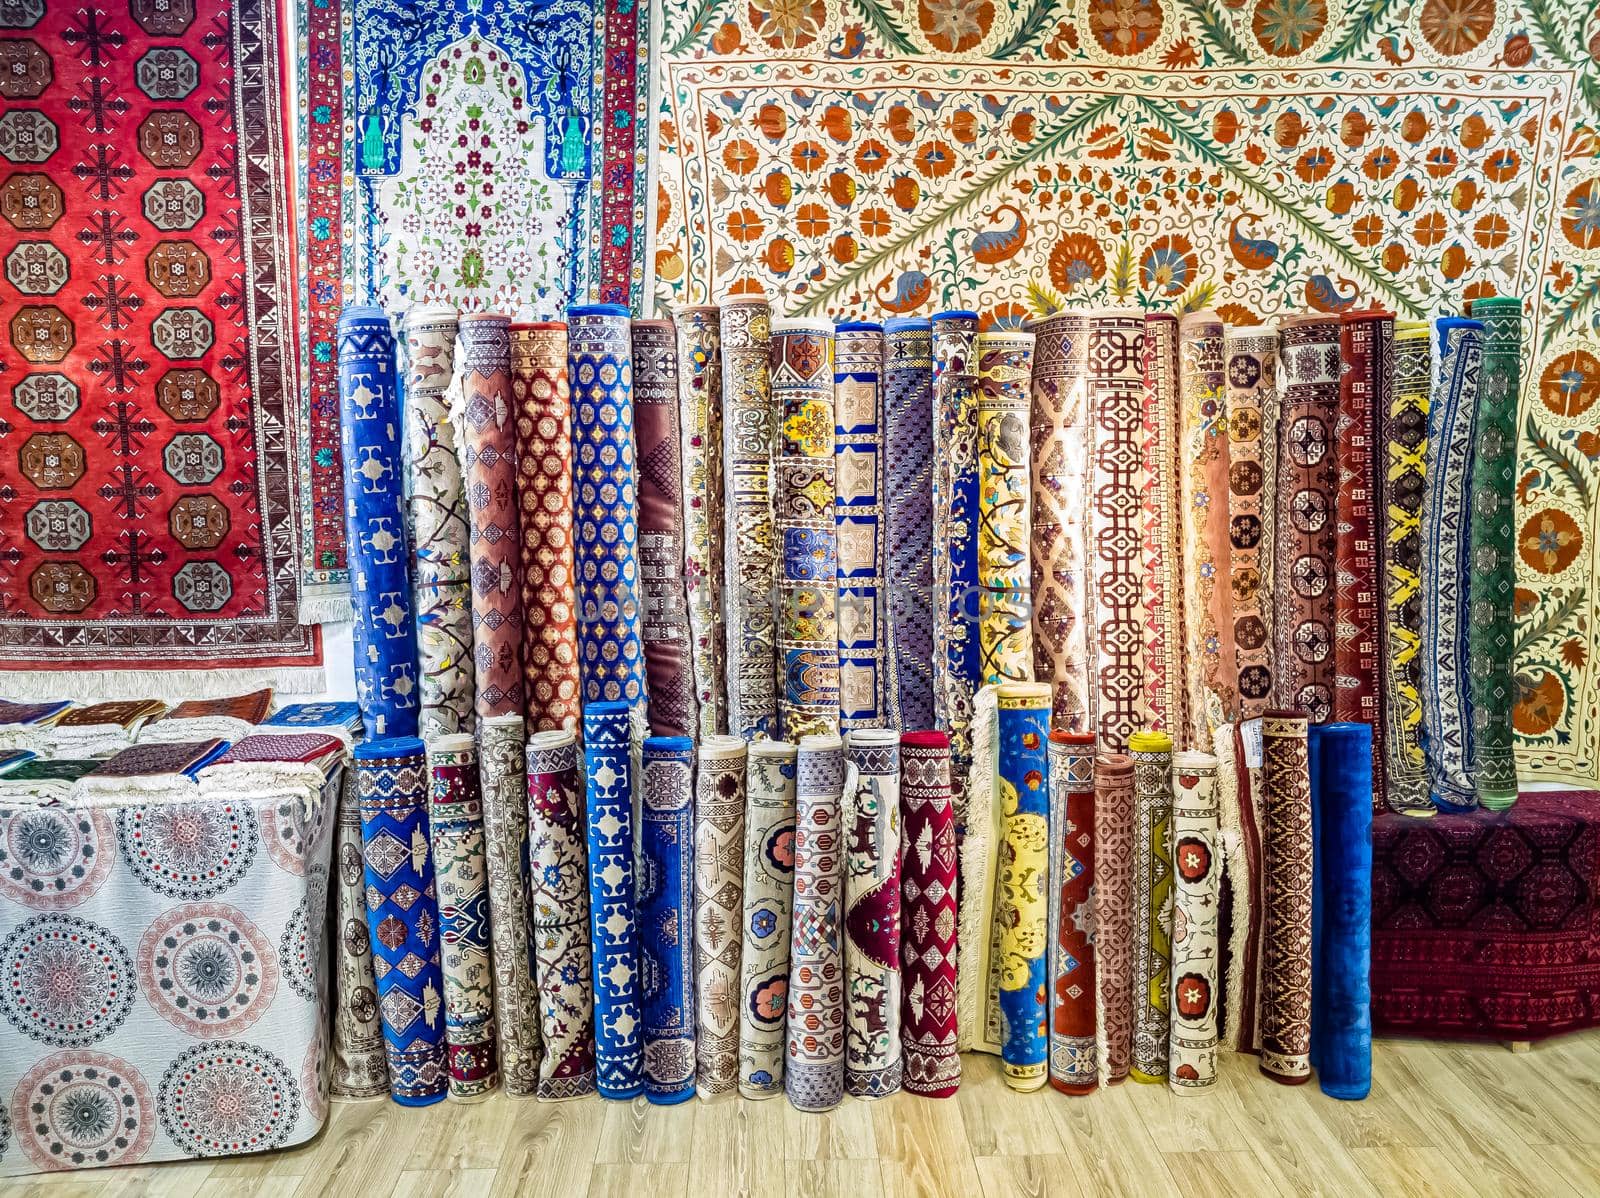 Ethnic carpet, ornamental folk bags, many ornate pillows with embroidery in asian shop, store. Asian market, trade fair in Uzbekistan. Traditional national ornament. Asian handicraft, Uzbek craft.